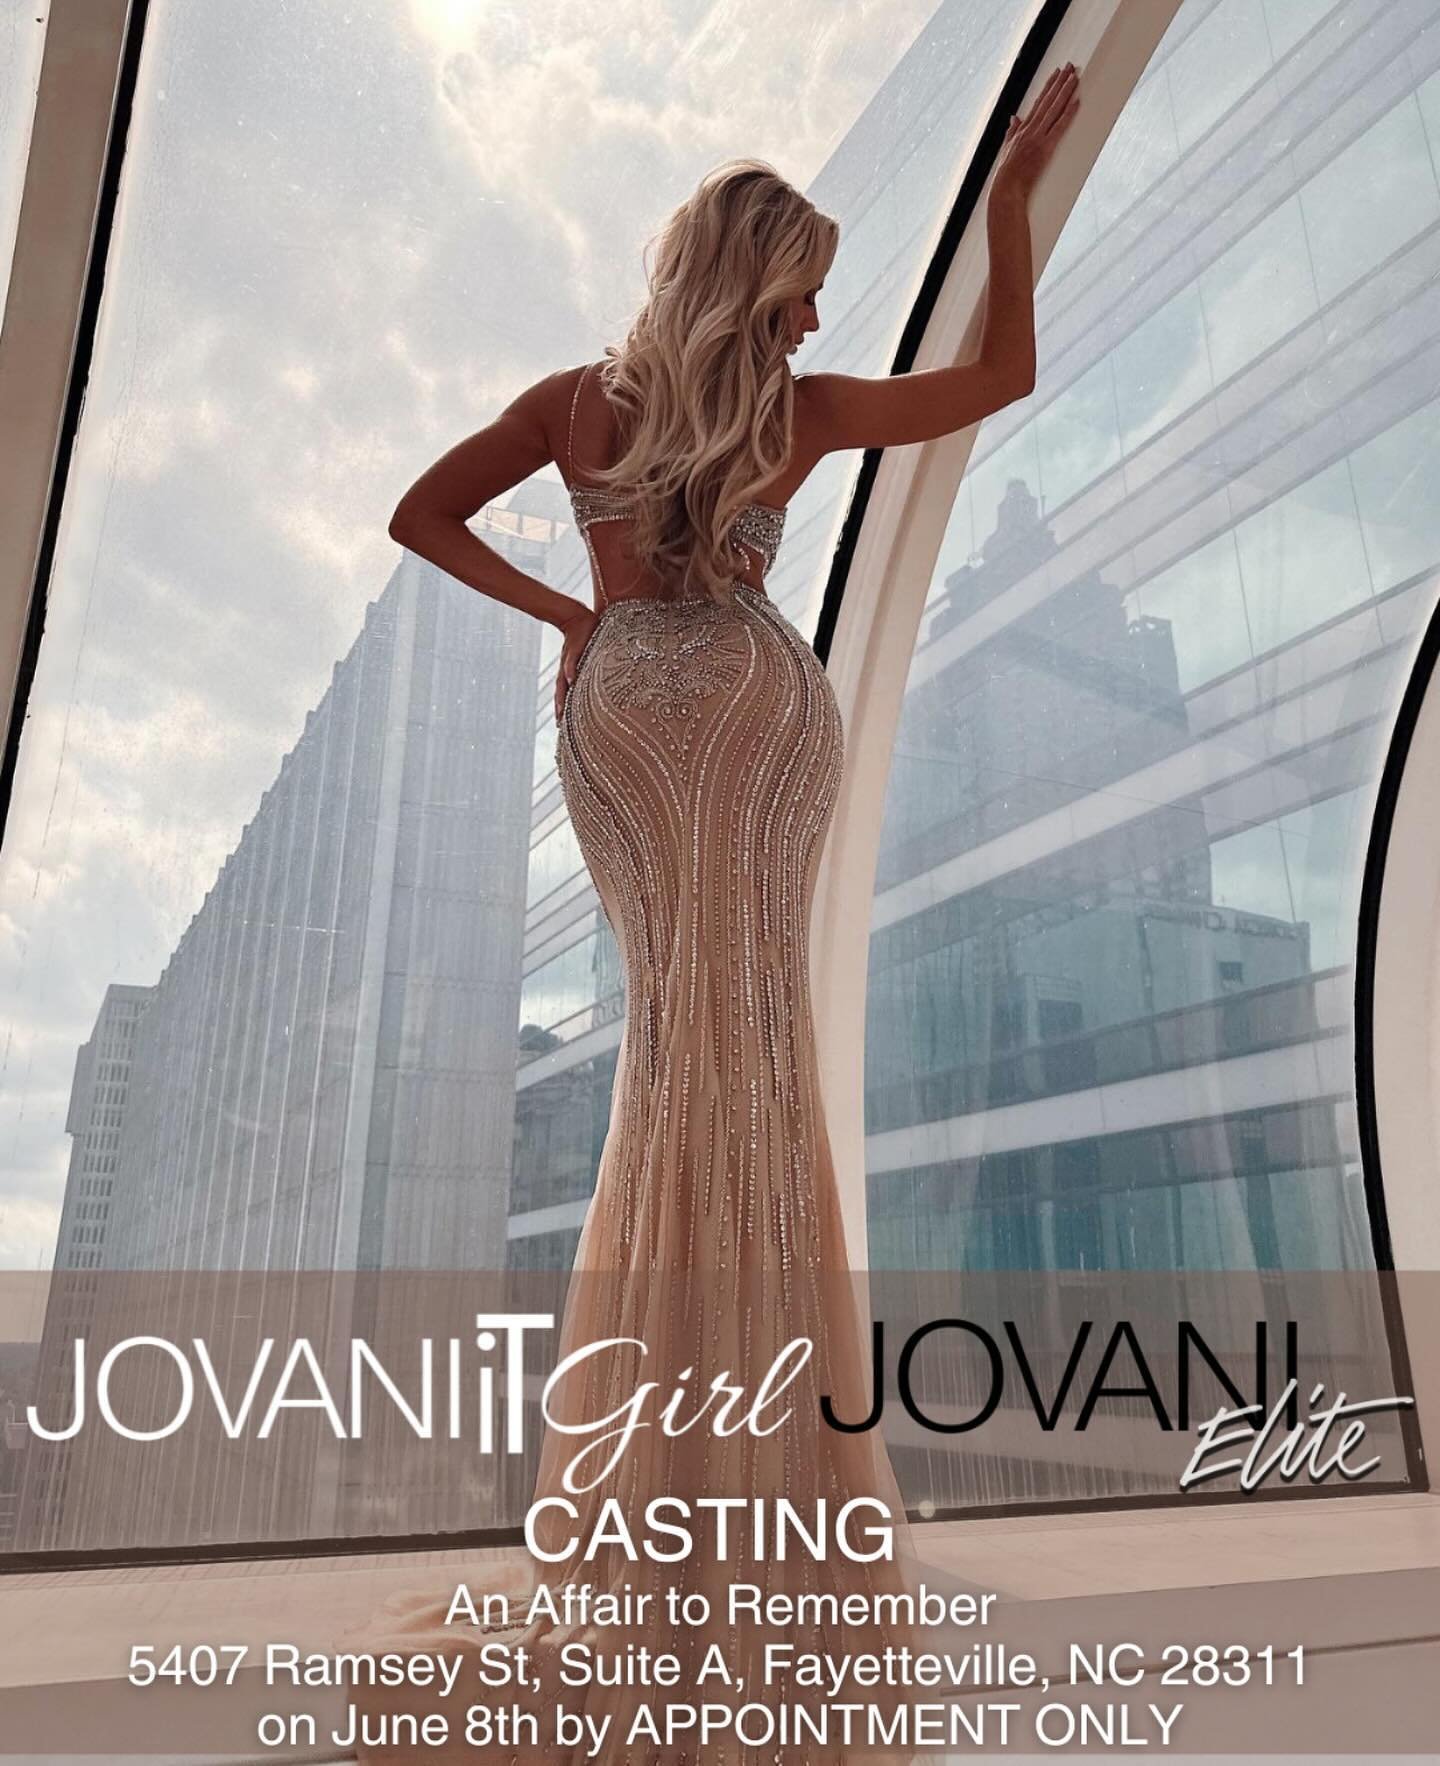 Dreaming of being a Jovani IT Girl or a Jovani Elite? June 8th we are hosting a Jovani casting call in store!! Call 910-486-5323 or DM us to book your appointment!! The spots will be gone fast so call to book now!!!! #AATRNC 

#model #jovani #jovanii